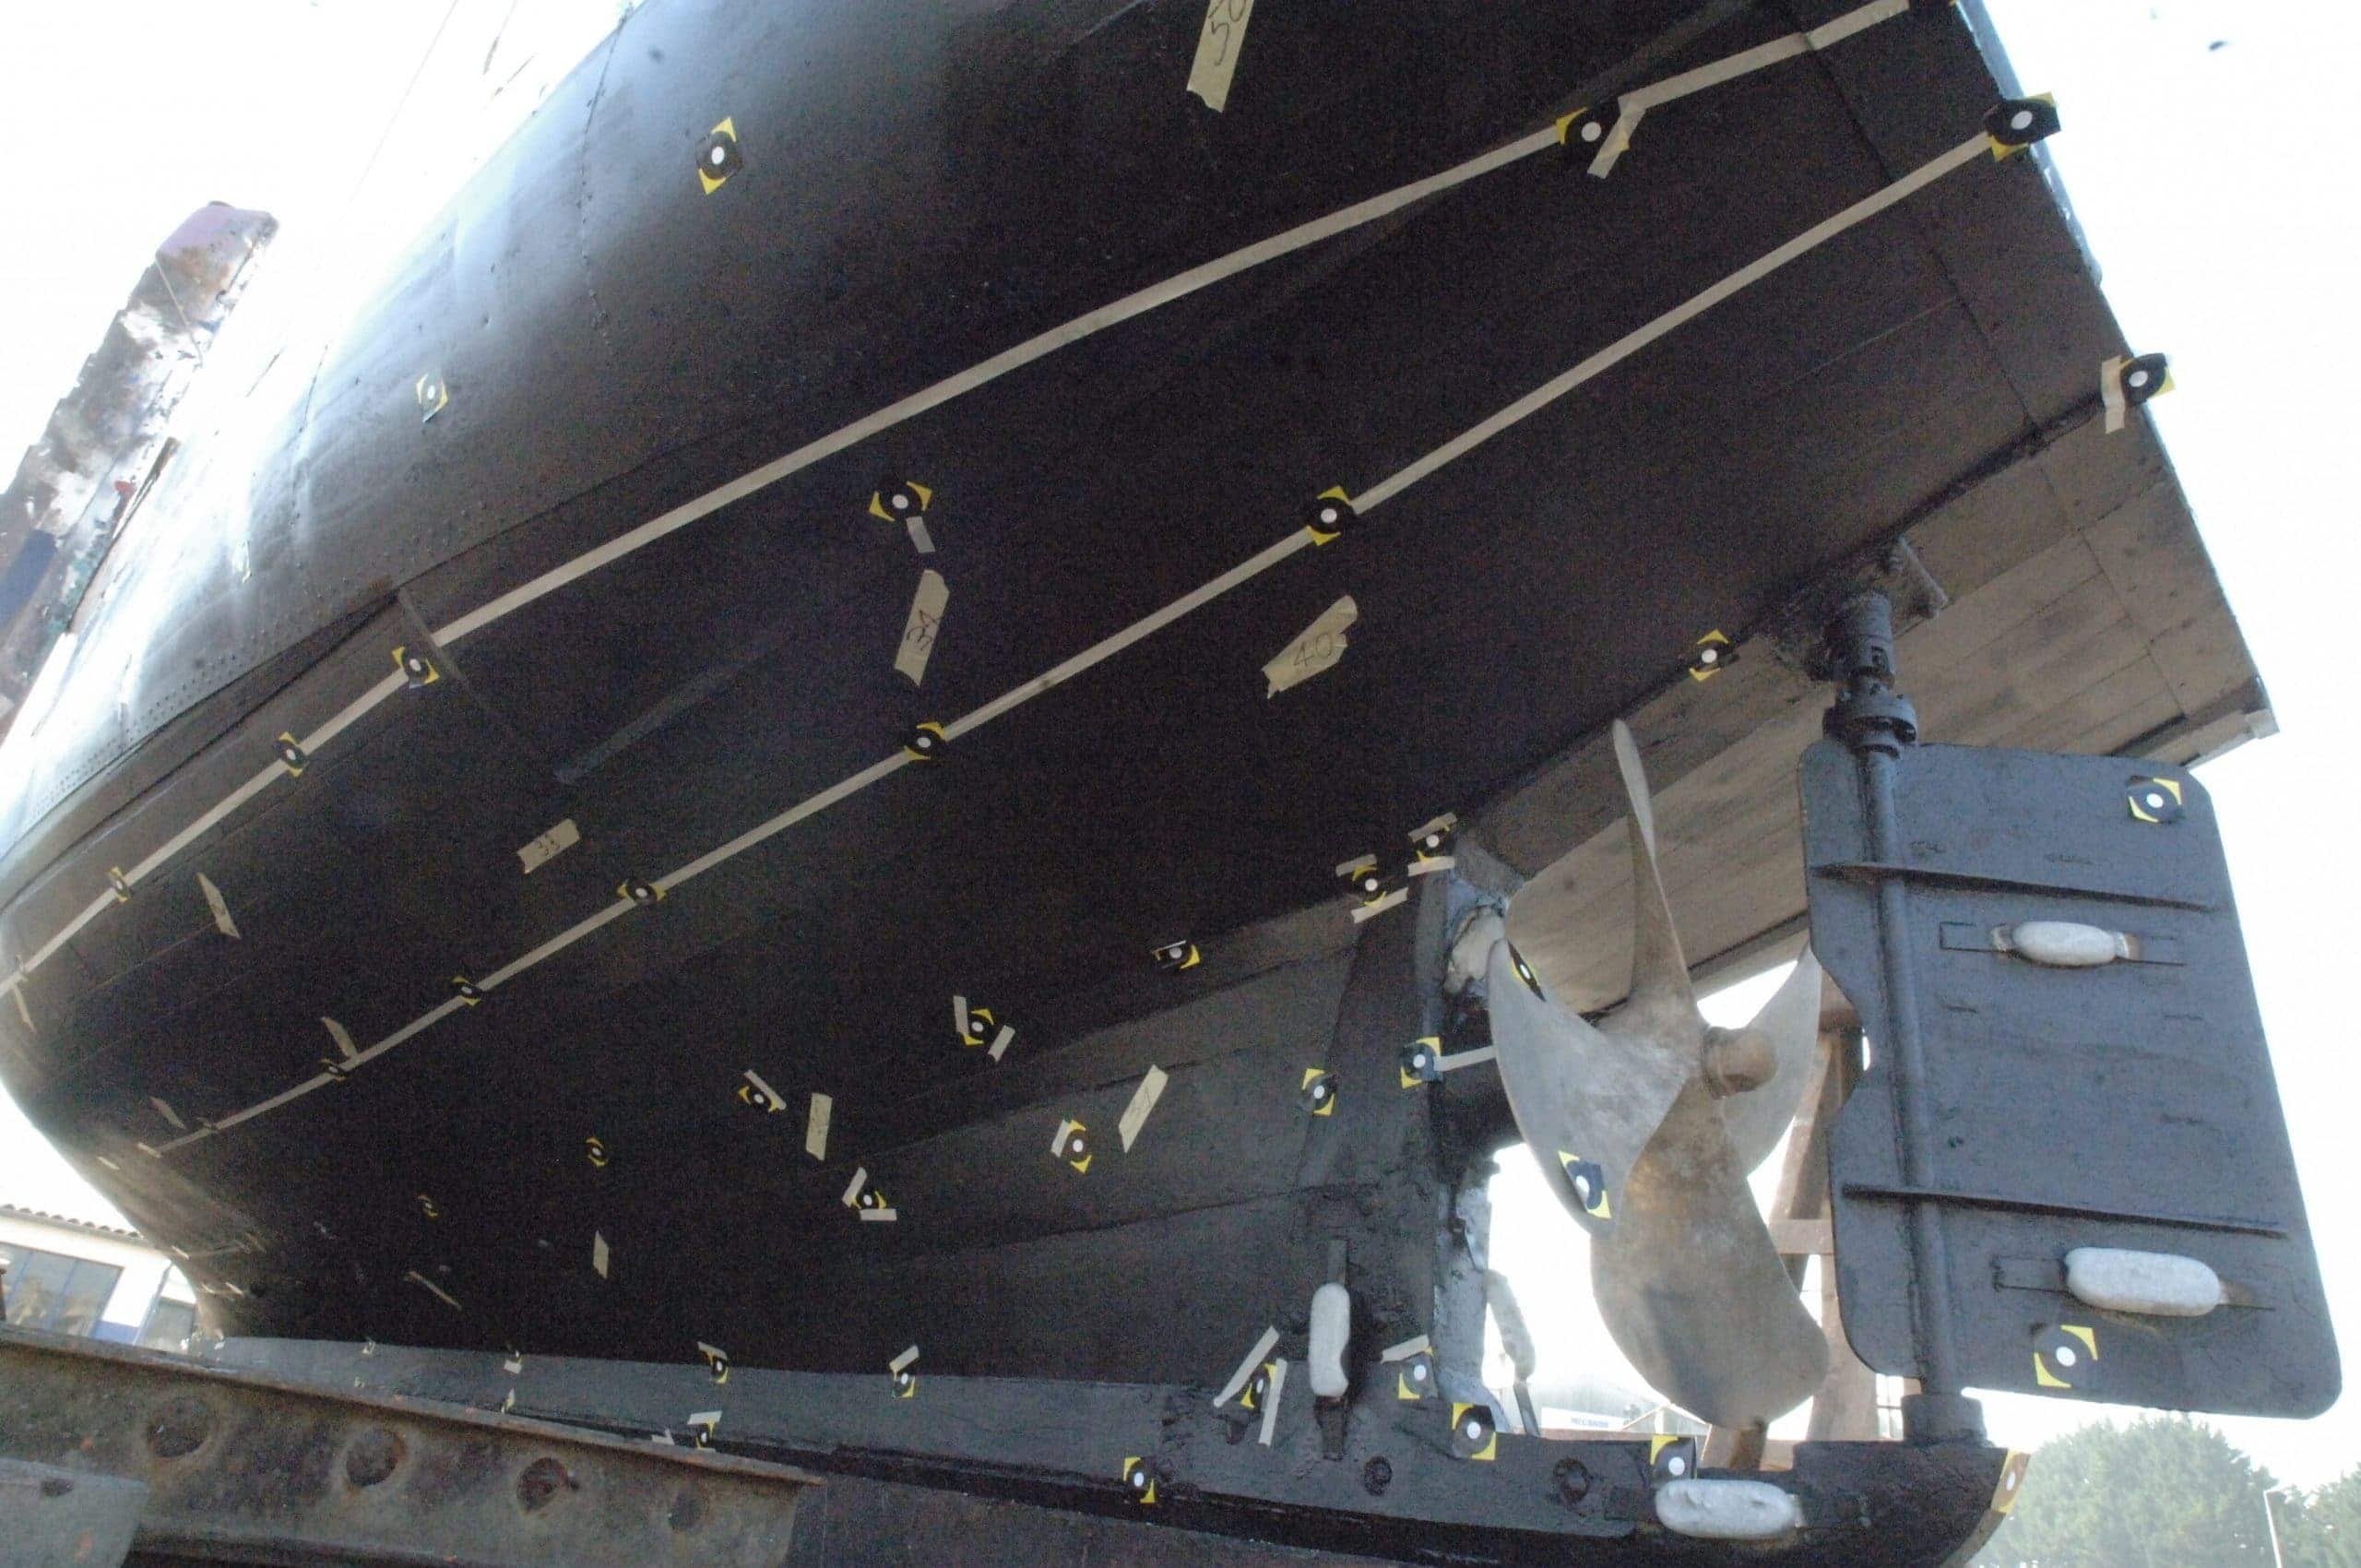 boat hull with targets